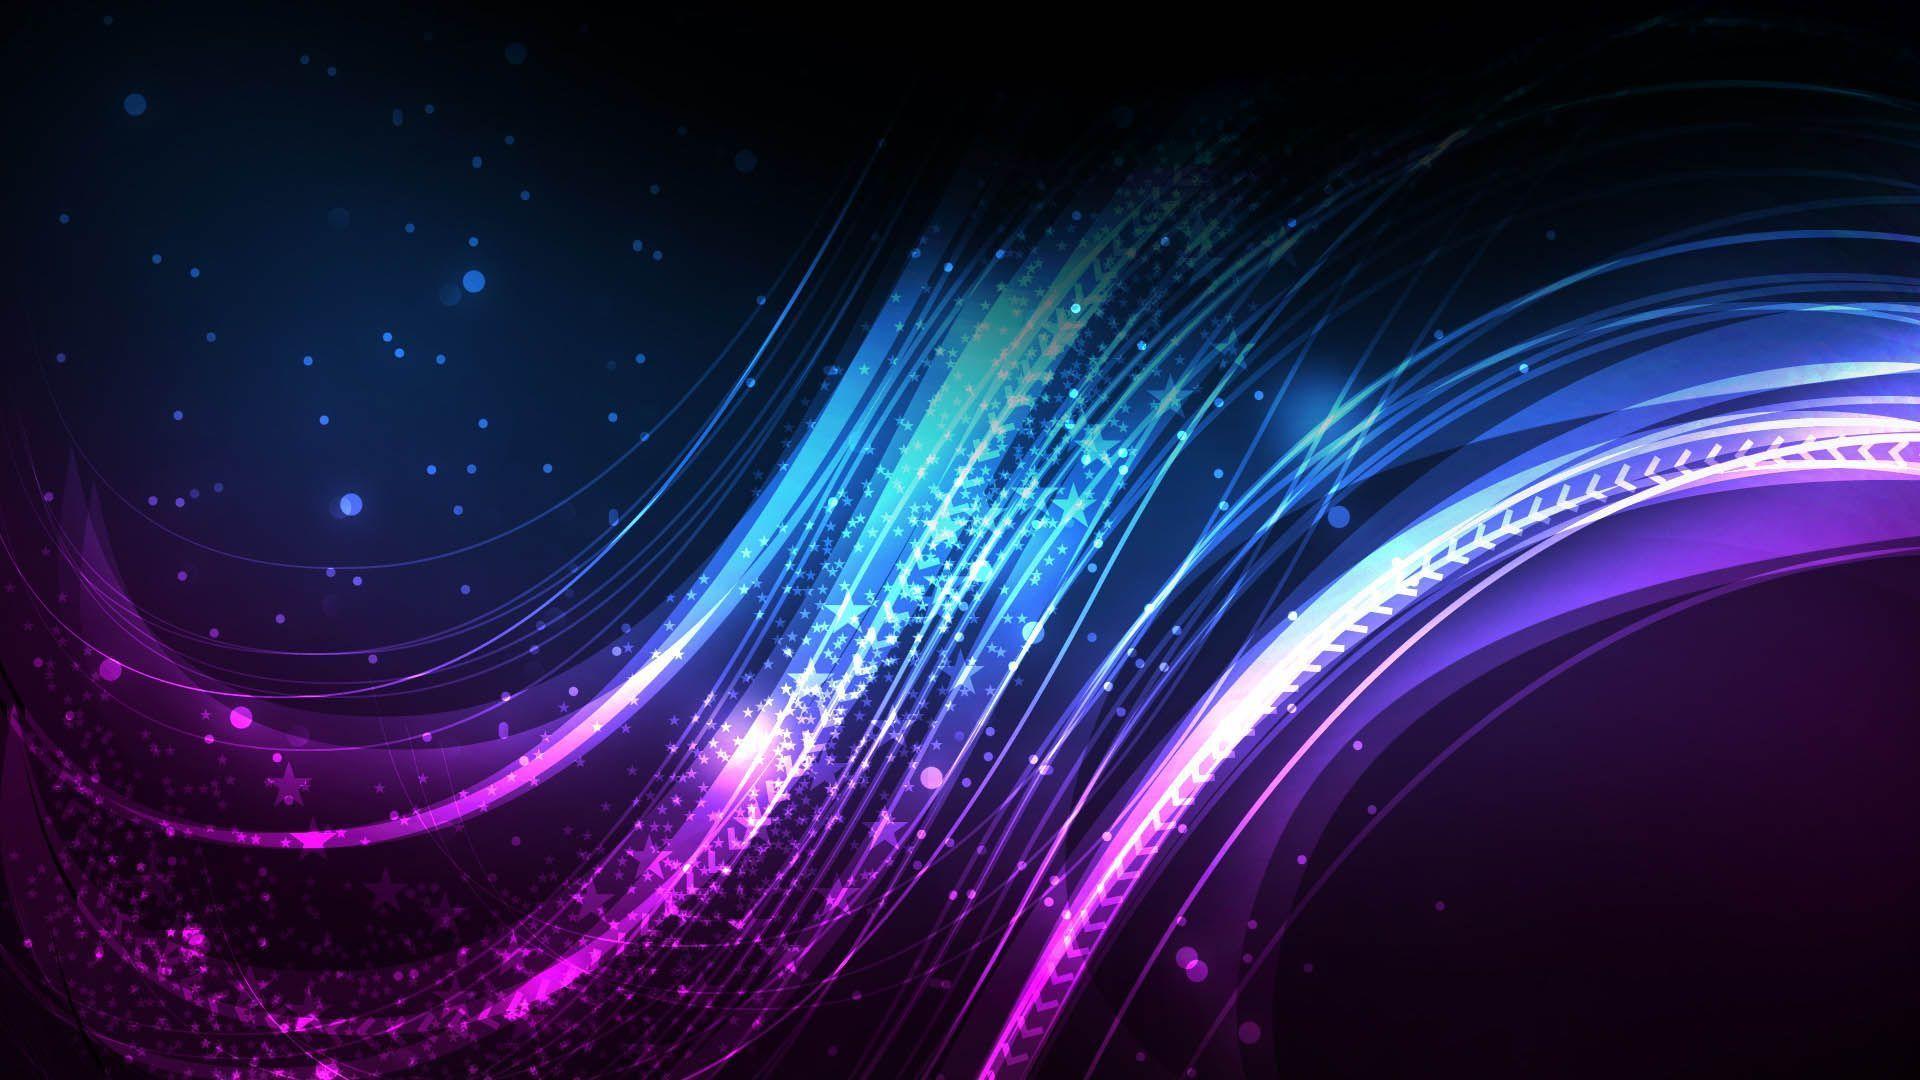 Wallpaper For > Purple And Blue Music Background